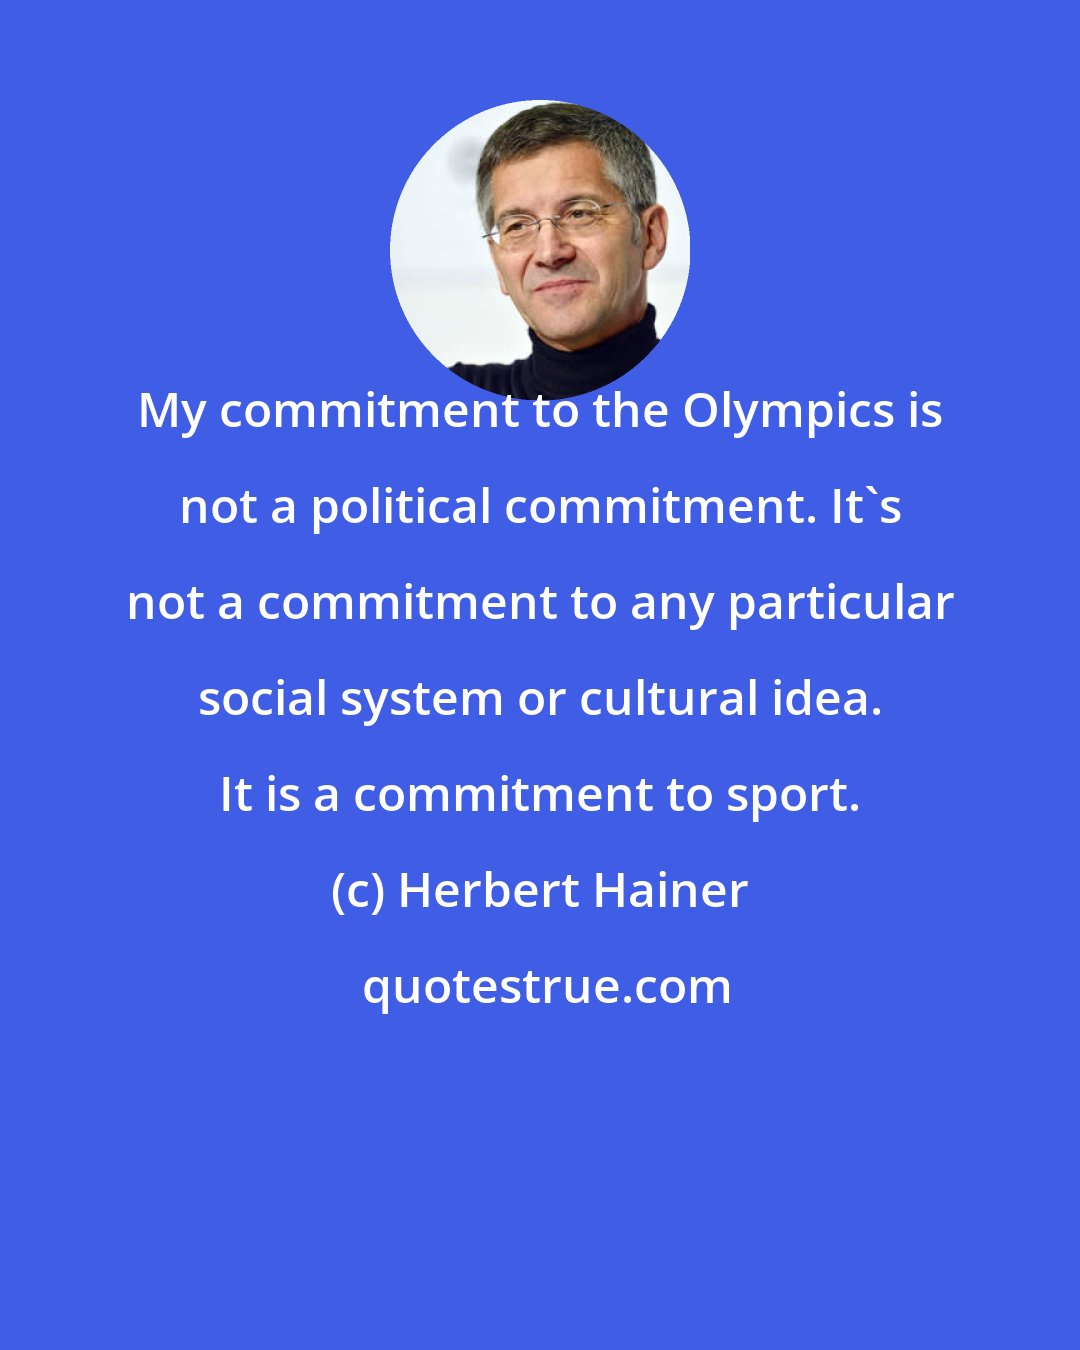 Herbert Hainer: My commitment to the Olympics is not a political commitment. It's not a commitment to any particular social system or cultural idea. It is a commitment to sport.